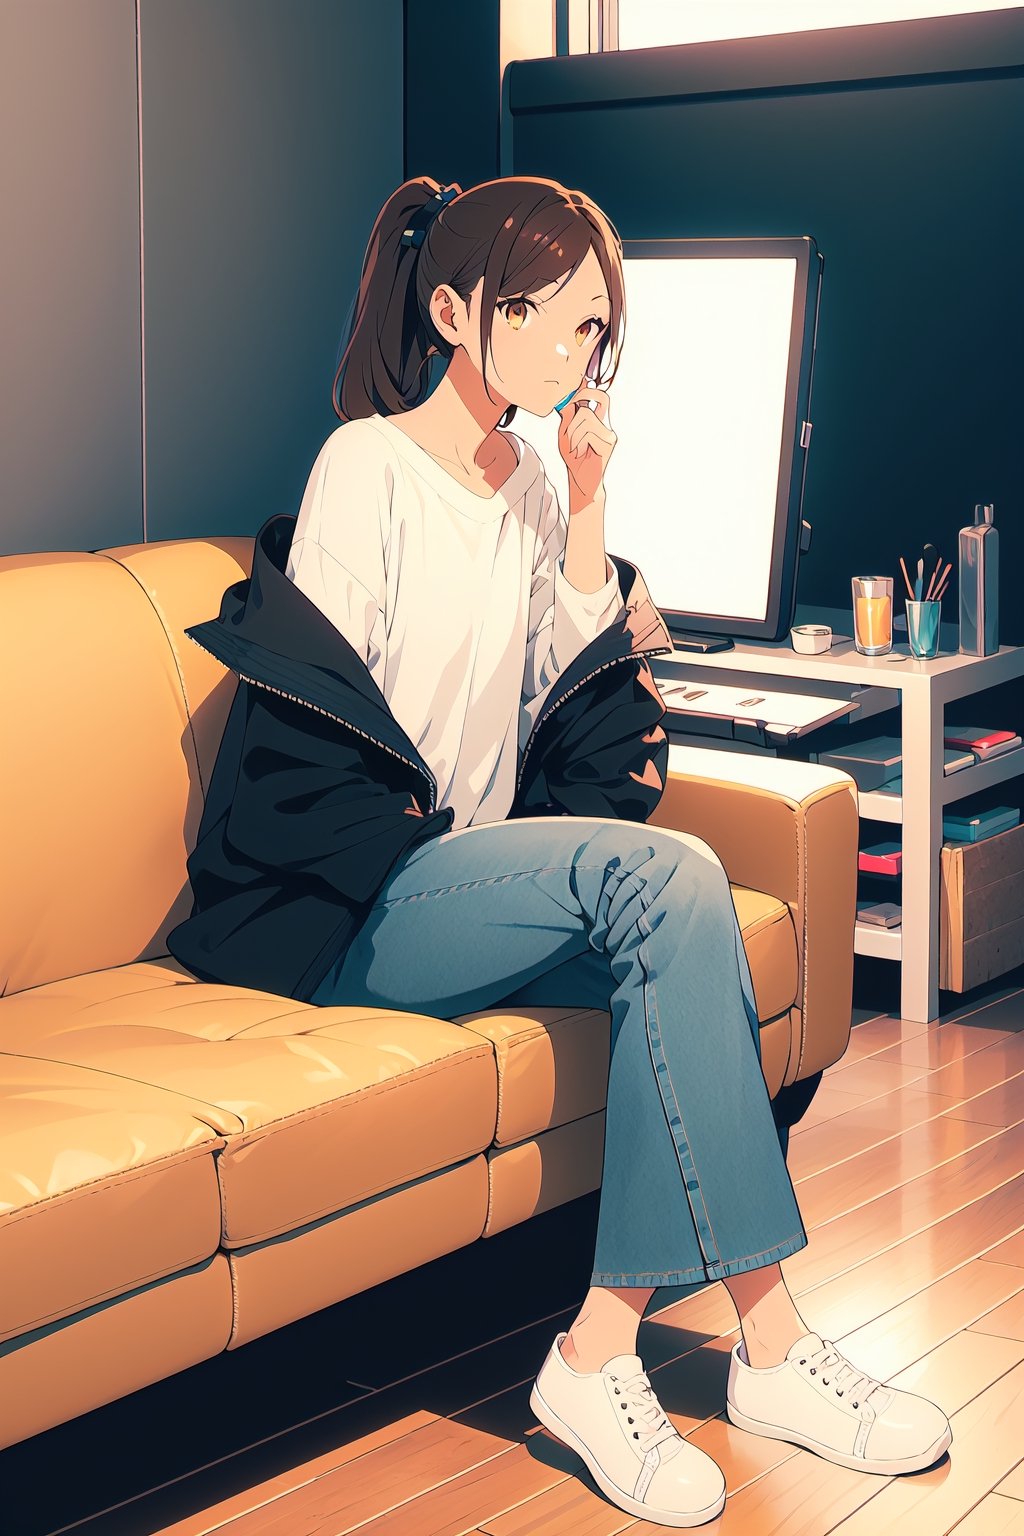 1girl,25 years old,ponytail,brown eyes,brown hair,portrait,jacket,jacket off shoulders,oversized white shirt,big oversized jeans, school shoes,illustration,fcloseup,rgbcolor, full_body, sitting, vintage sofa,front view, looking_at_viewer, smug look,photostudio,emotion,body looking forward, midnight, make-up, lipstick, relax